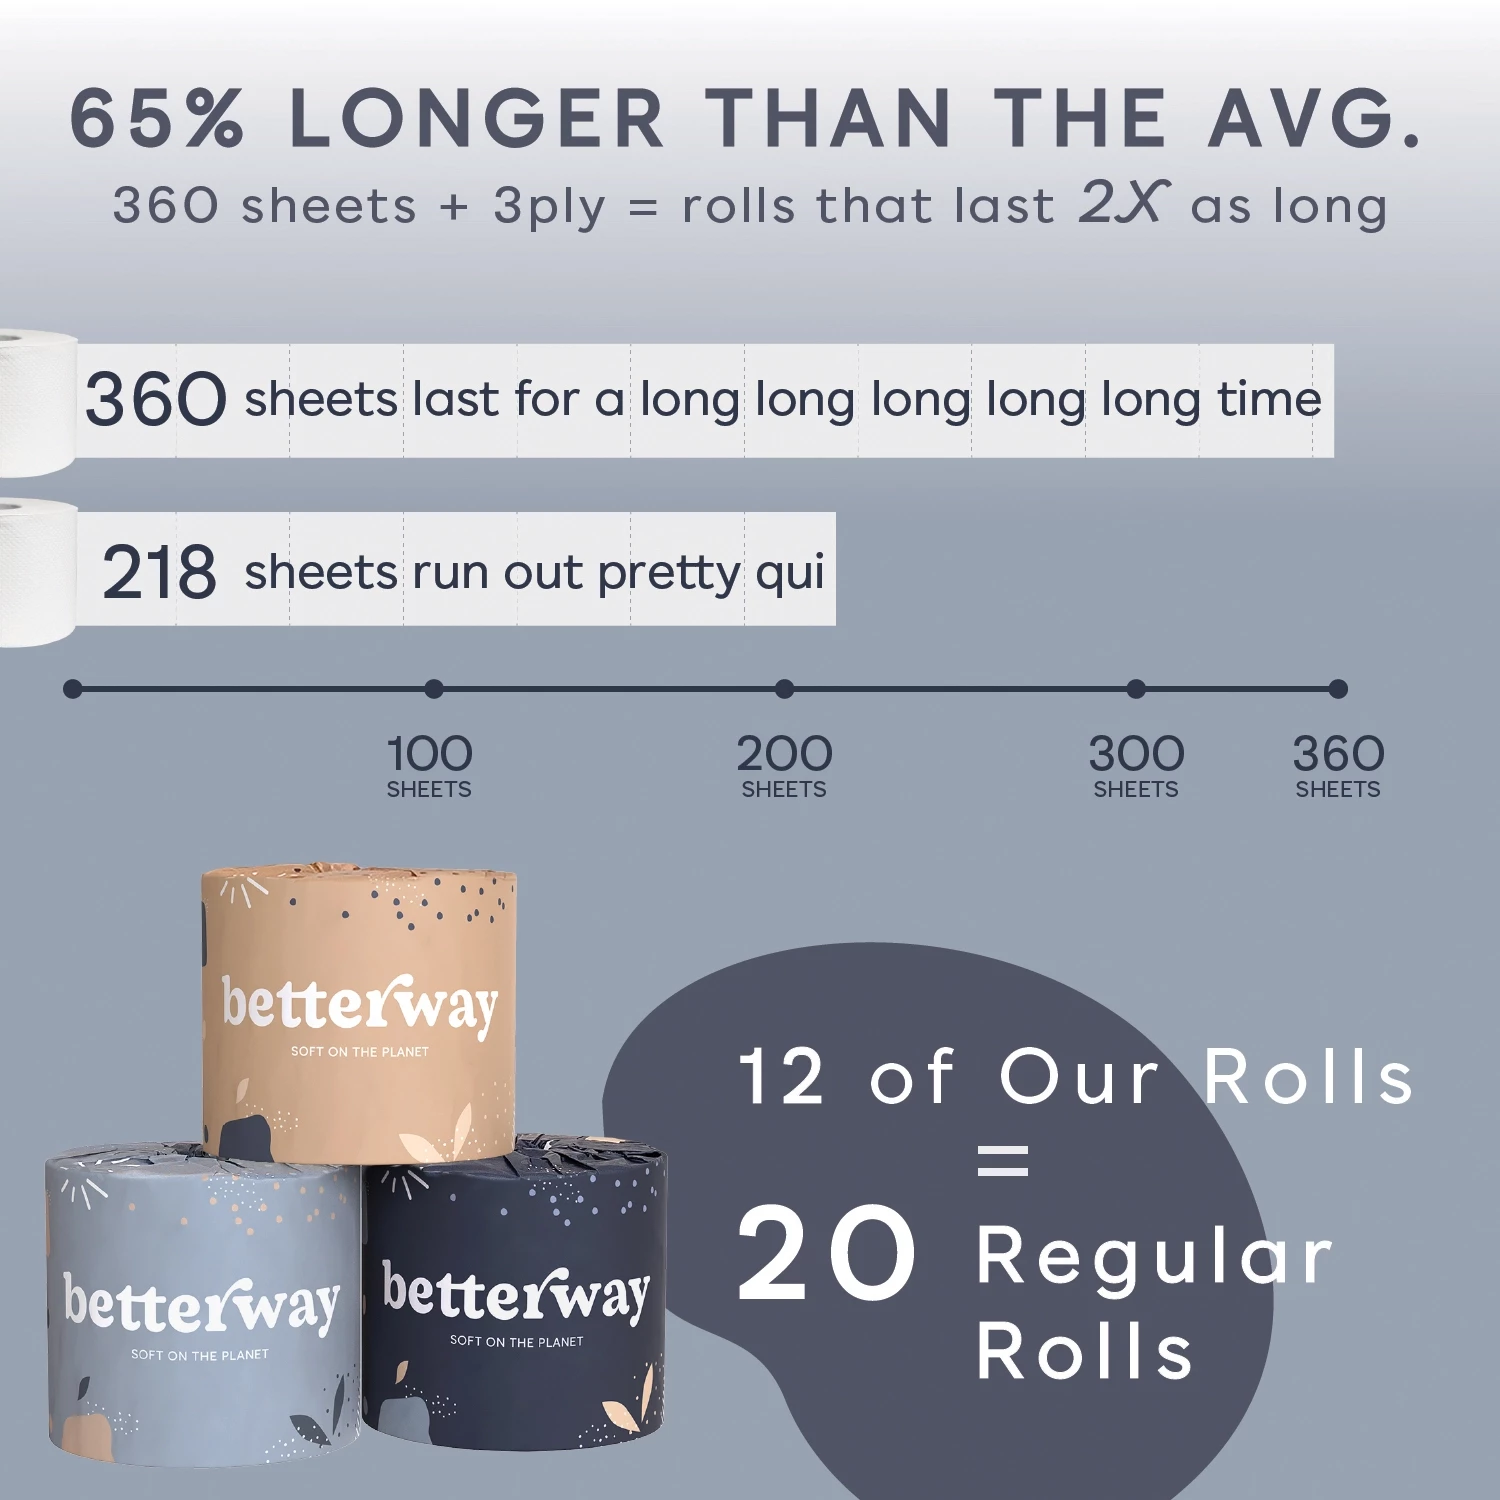 infographic - 65% longer than the average. 360 sheets + 3play=rolls last 2x as long